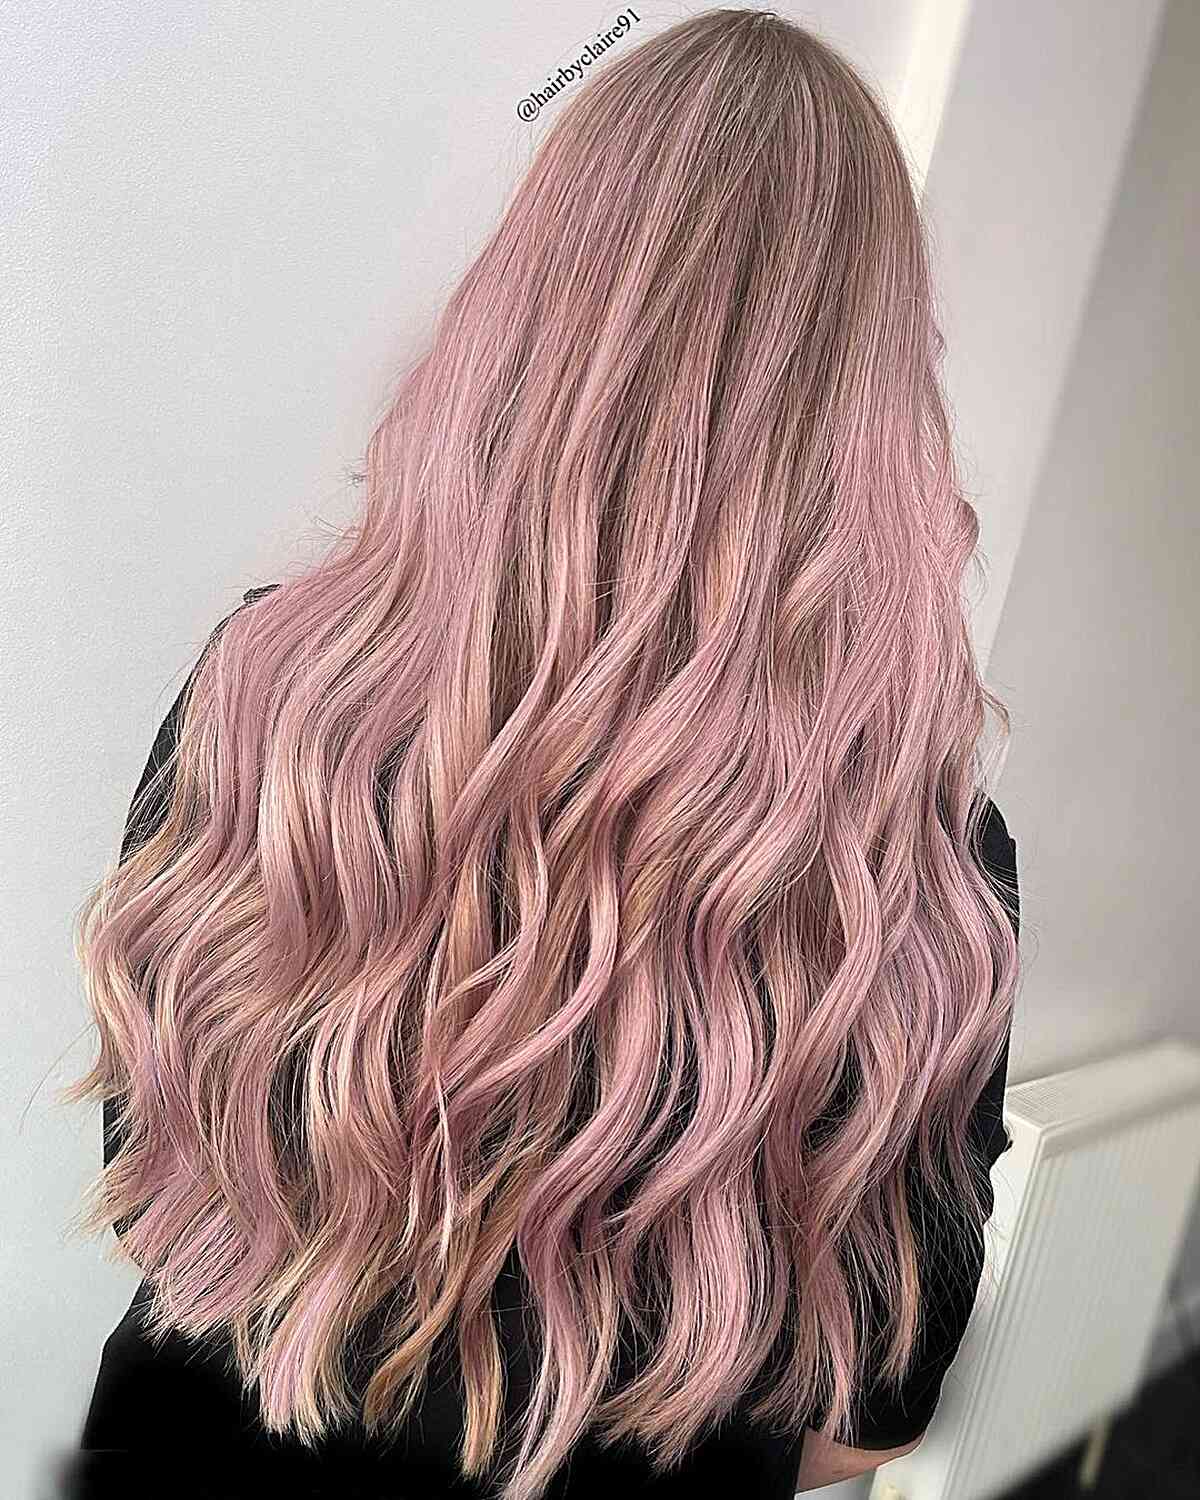 Pastel hair color: 20+ elegant, delicate shades for a new look